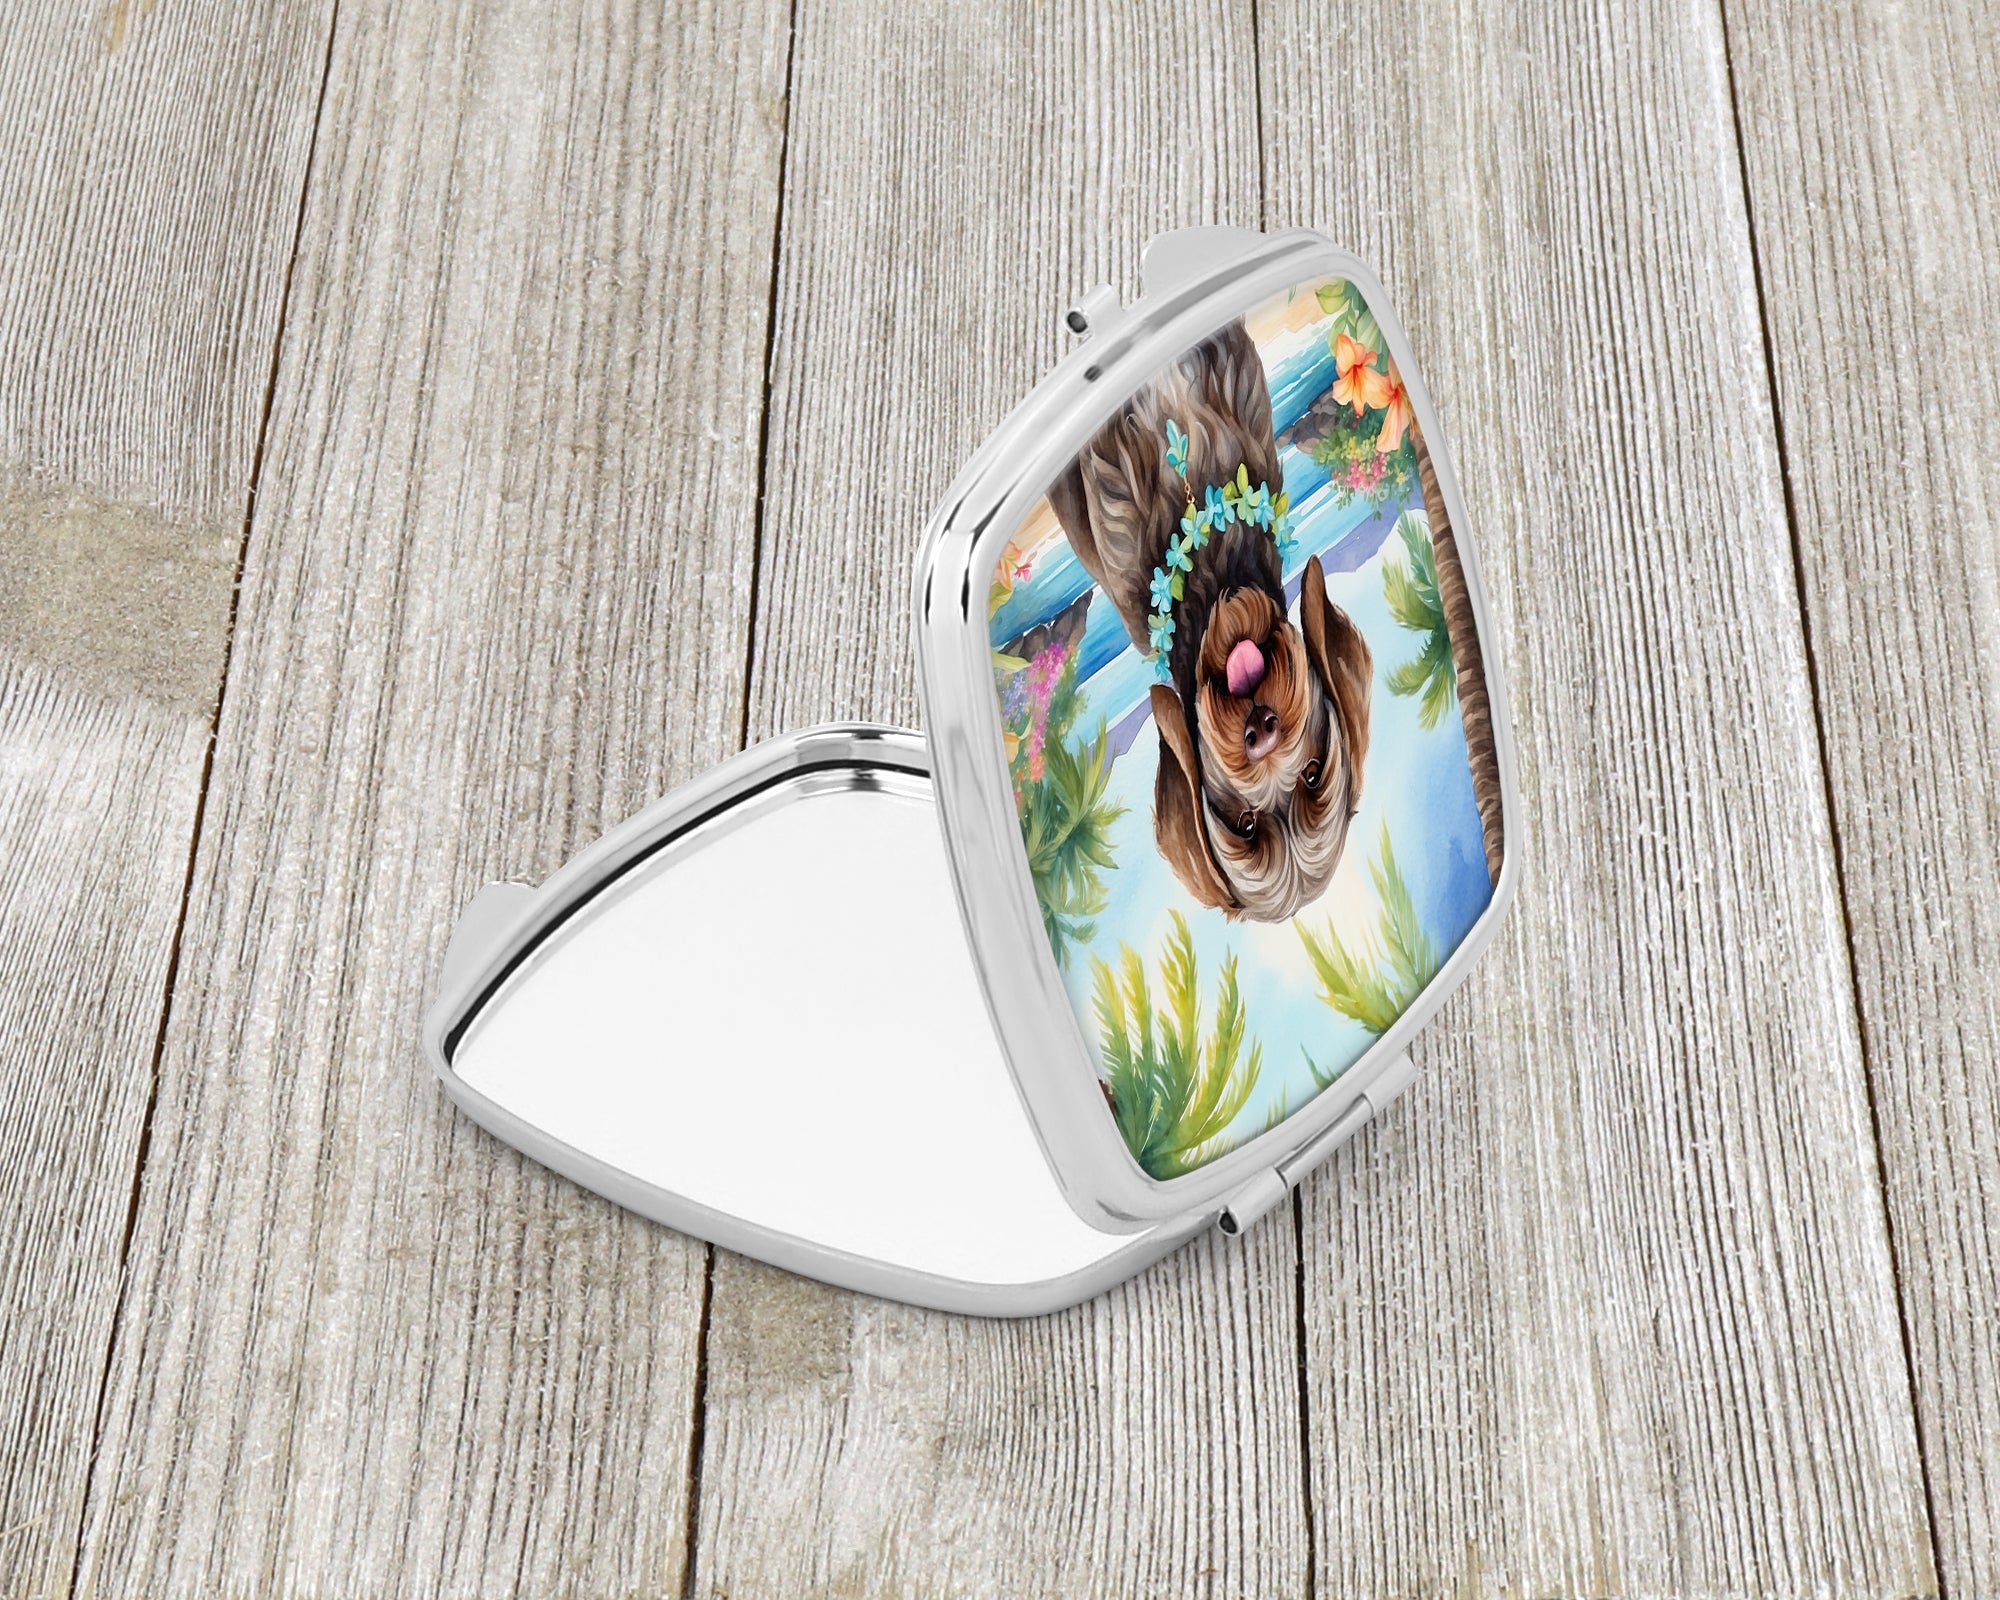 Buy this Wirehaired Pointing Griffon Luau Compact Mirror